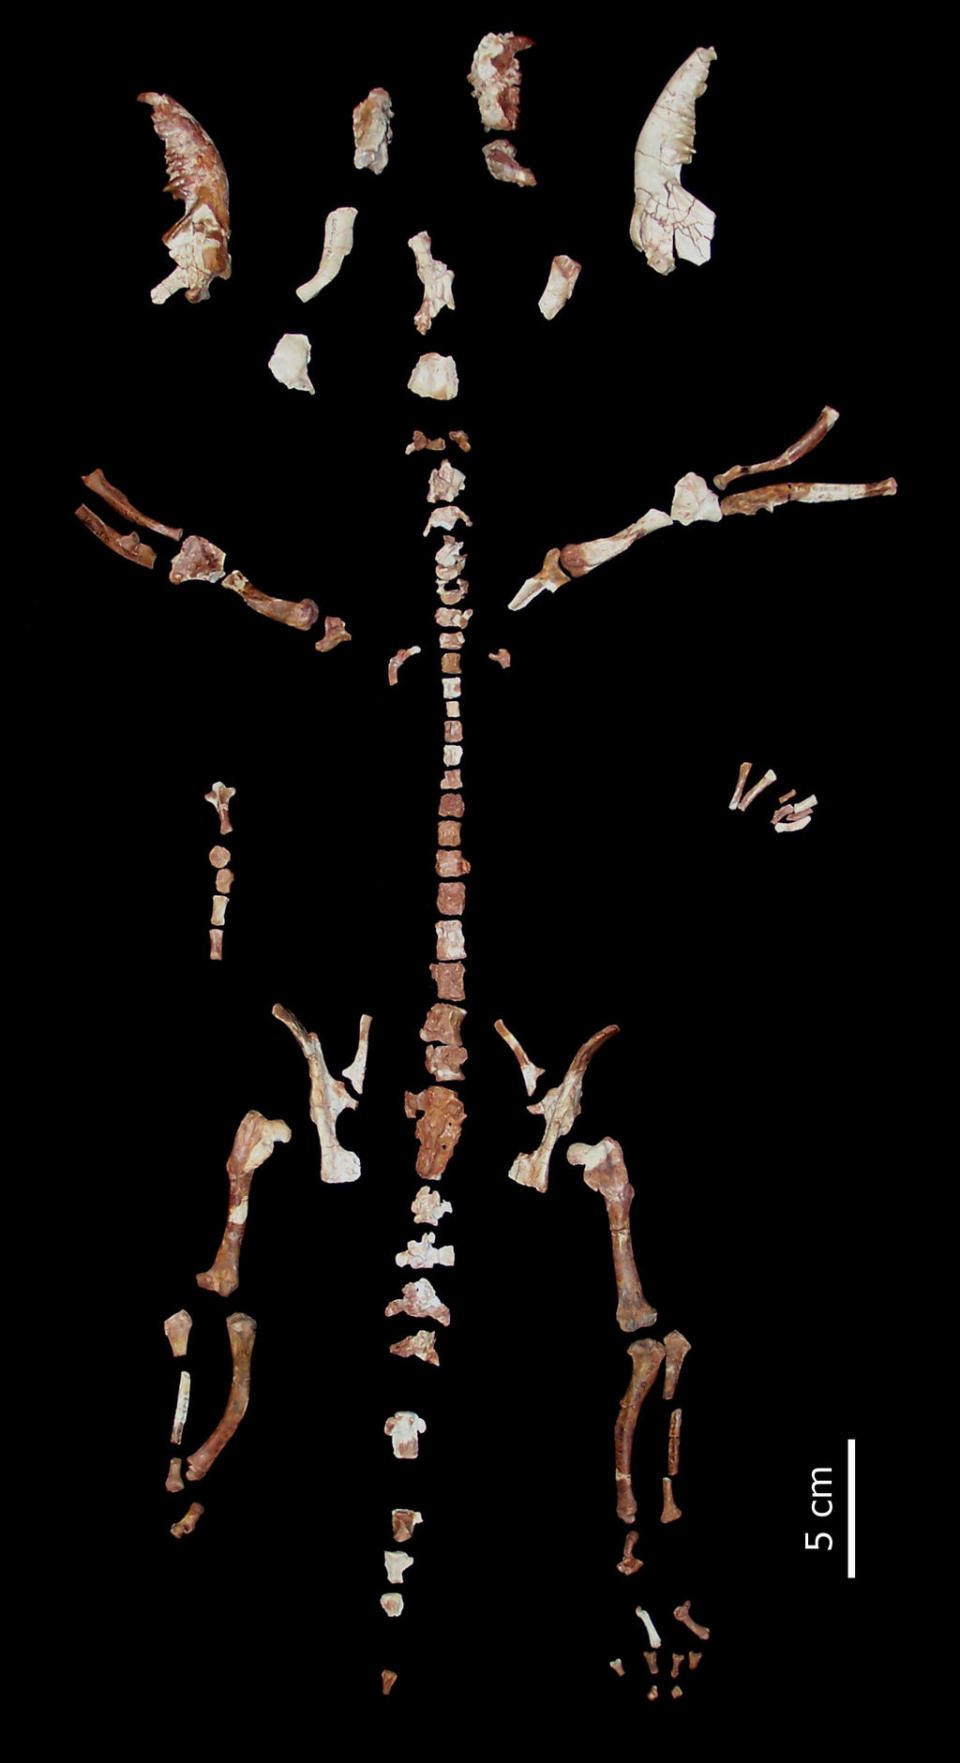 This near-complete ancient marsupial skeleton likely dates from the middle Eocene period, 43 million to 44 million years ago. <cite>Murat Maga</cite>